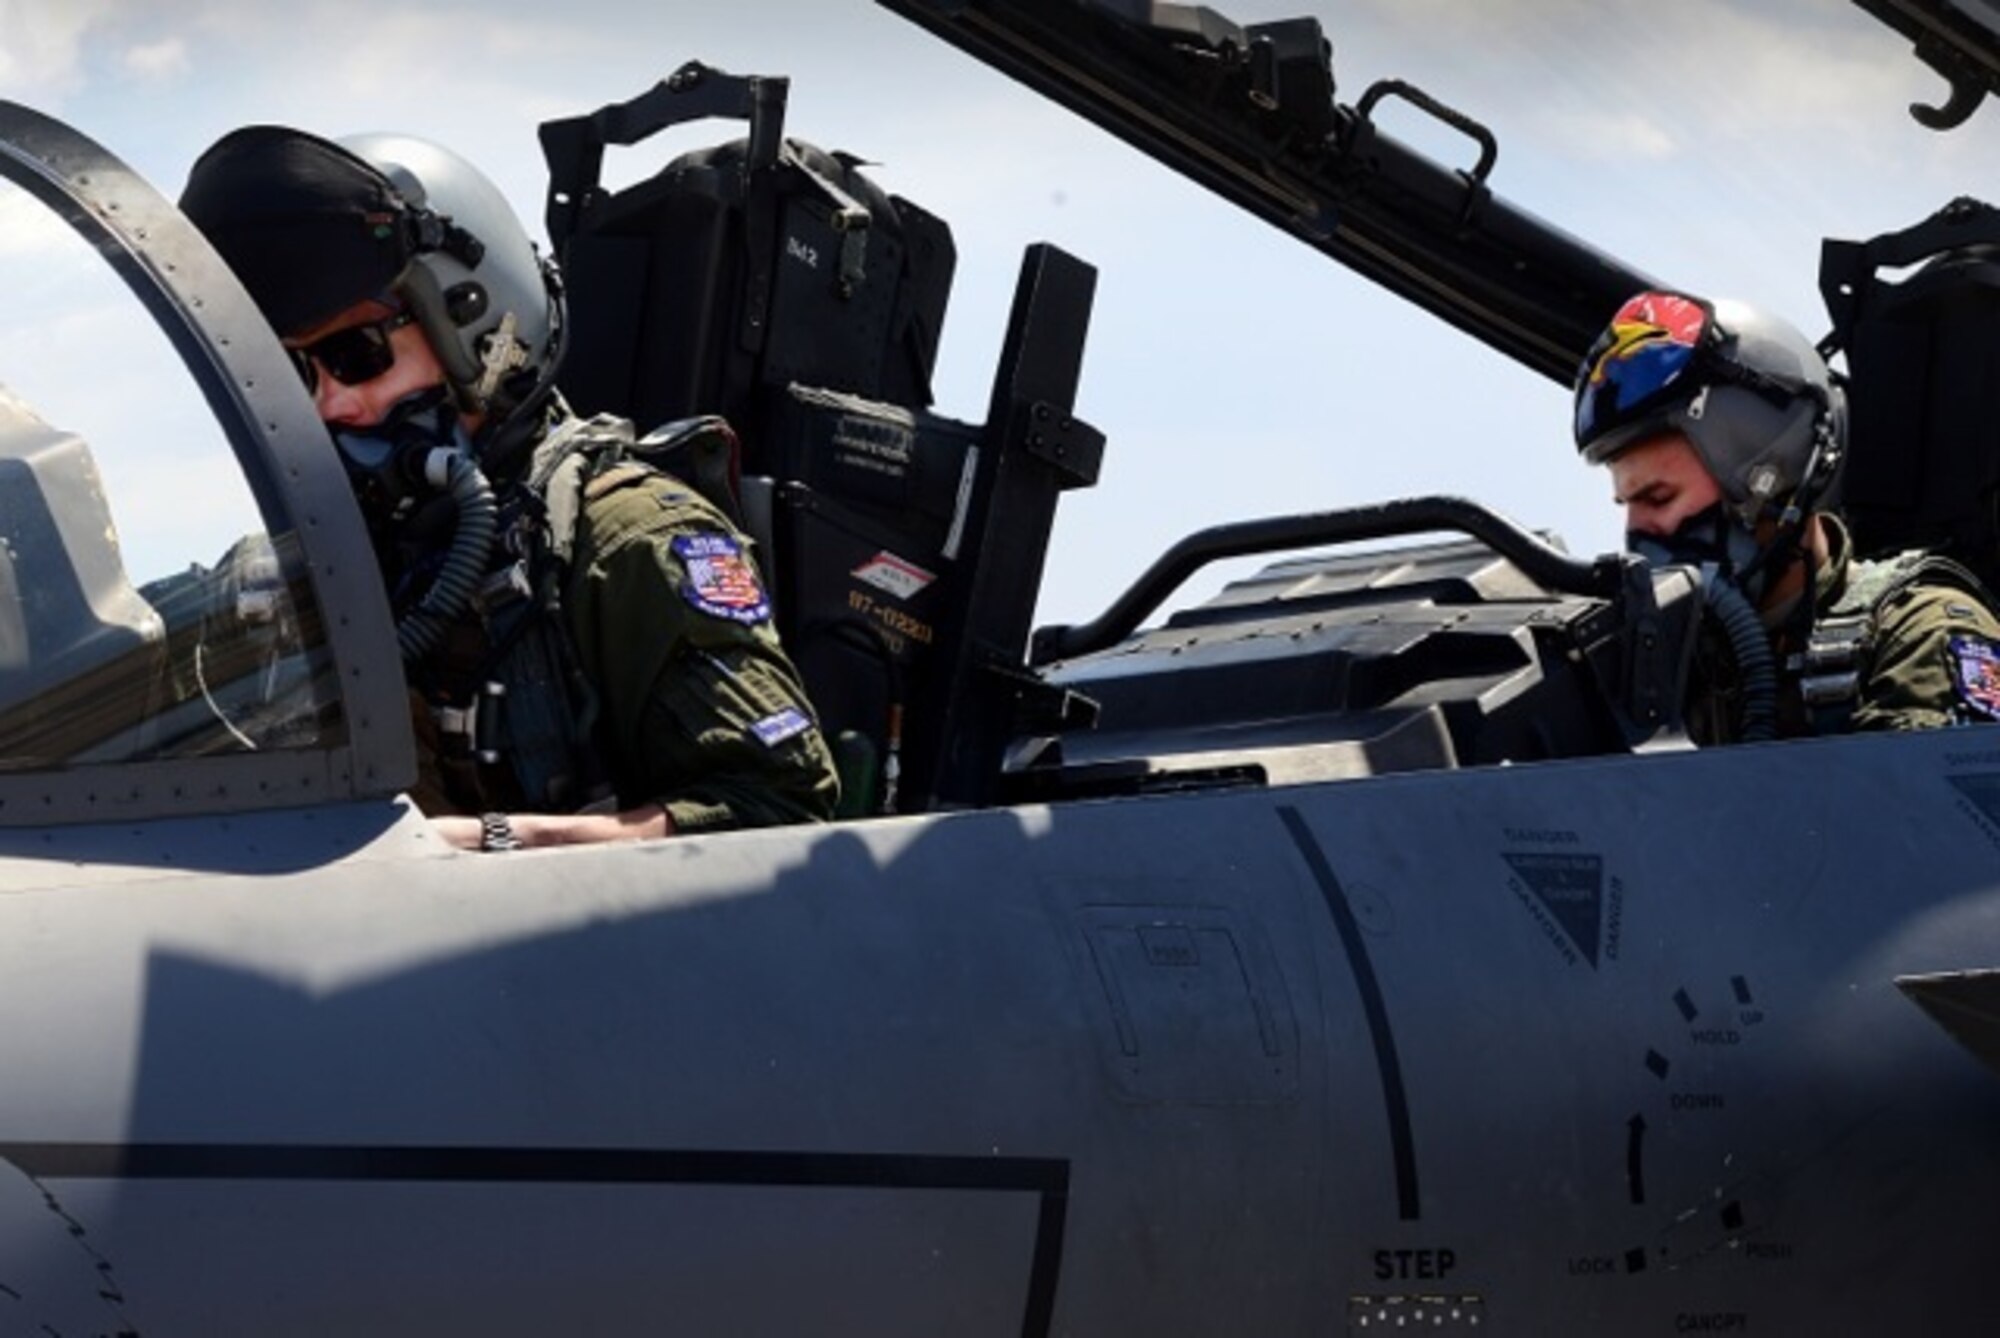 U.S. Air Force 1st Lieutenant Drew Lyons, 492nd Fighter Squadron, F-15E Strike Eagle pilot, and 1st Lieutenant J. Paul Reasner, 492nd FS, F-15E Strike Eagle weapon systems officer, run through their pre-flight systems checks for a sortie in support of exercise Red Flag 16-4 at Nellis Air Force Base, Nevada Aug 17. Lyons and Reasner’s goal as first-time participants at Red Flag is to benefit from each training scenario and become better wingmen for their squadron. (U.S. Air Force photo/ Tech. Sgt. Matthew Plew)